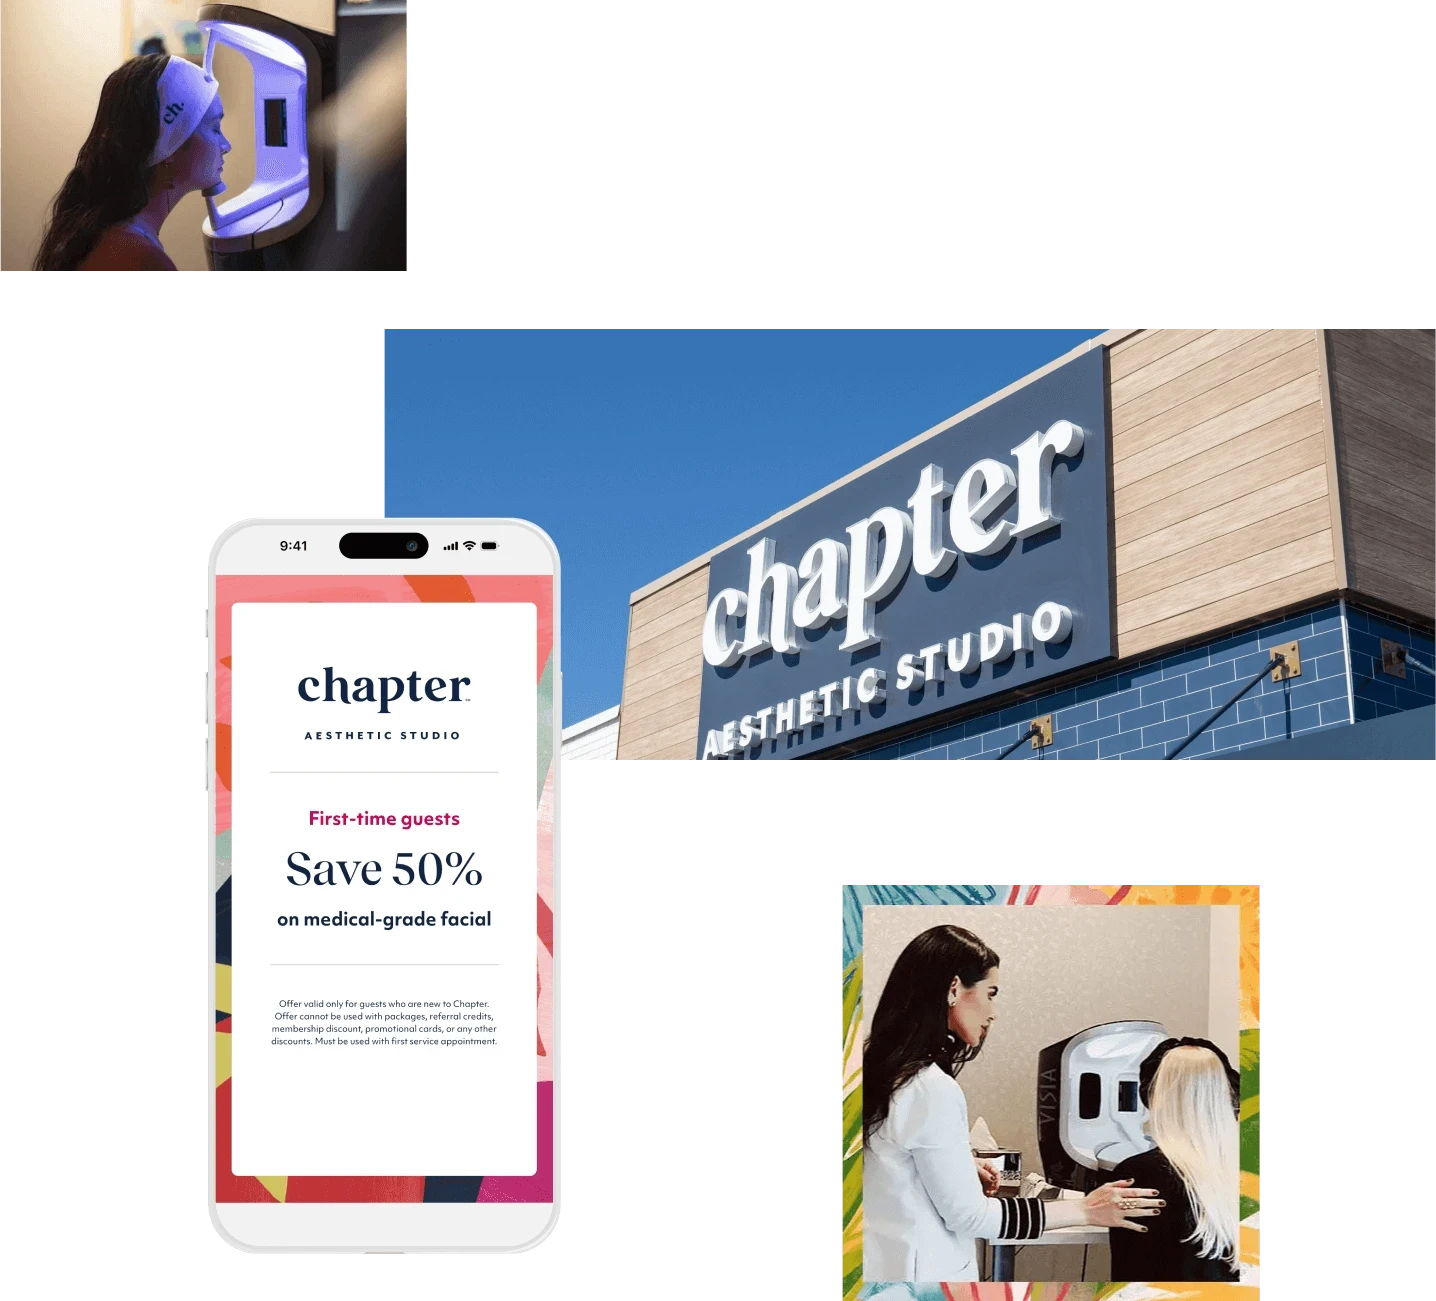 An arrangement of images including the exterior of a Chapter Aesthetic Studio location, a smartphone displaying a promotional offer, and visitors undergoing VISIA skin analysis.